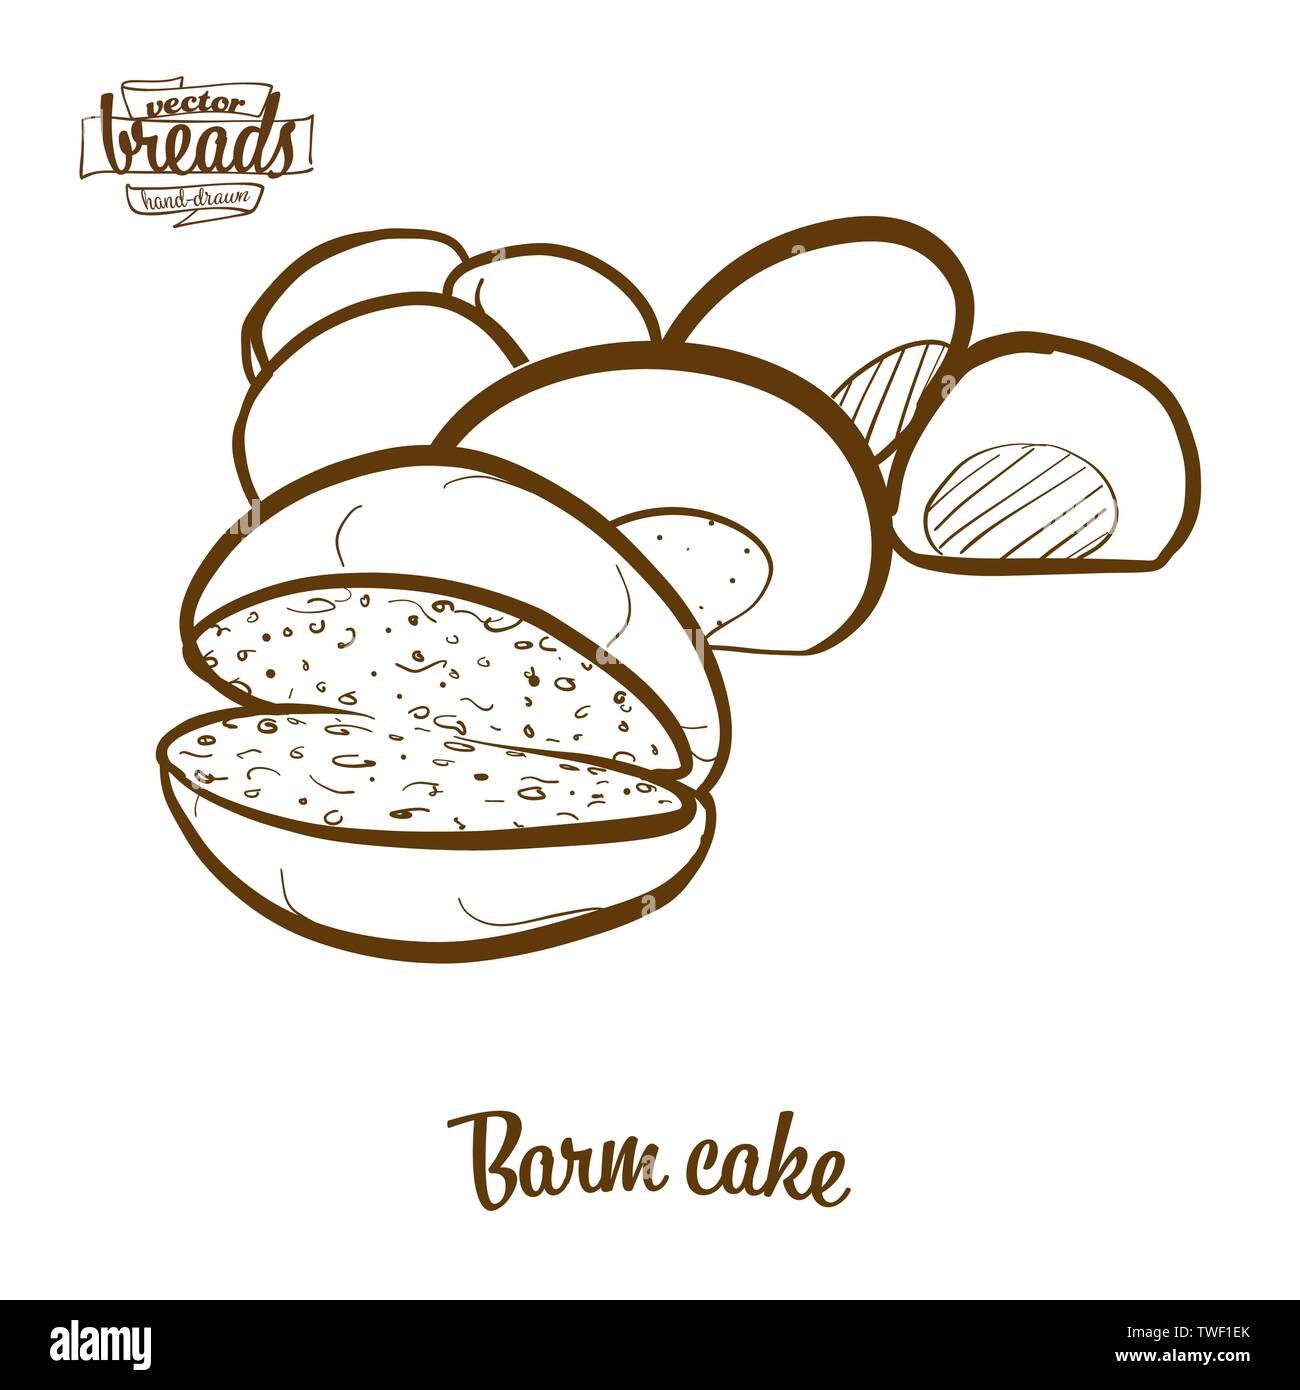 Barm cake bread vector drawing. Food sketch of Yeast bread, usually known in Lancashire. Bakery illustration series. Stock Vector